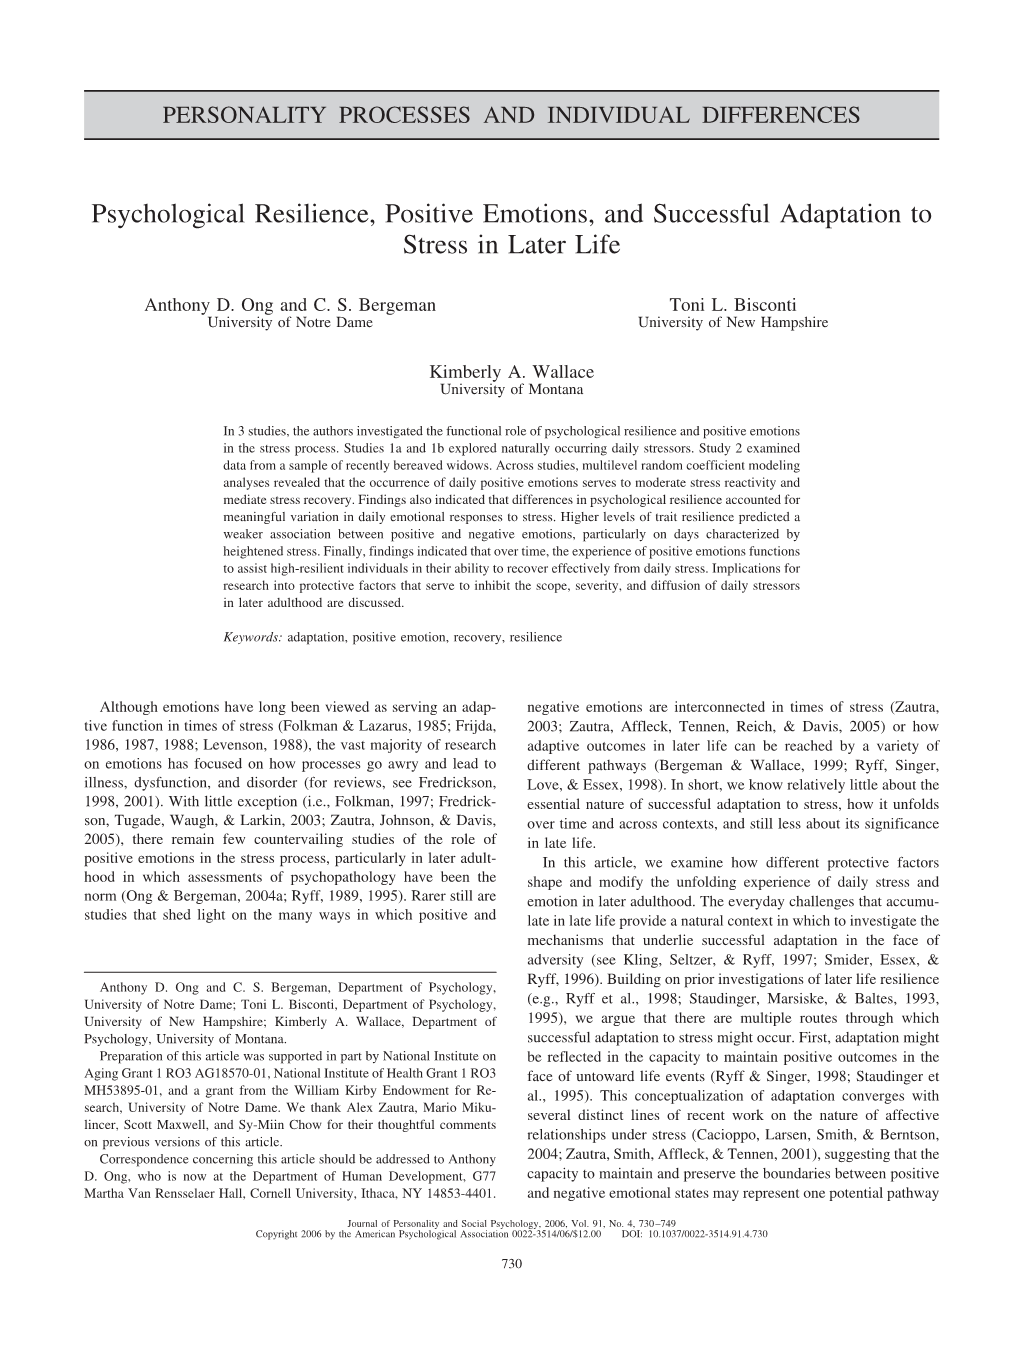 Psychological Resilience, Positive Emotions, and Successful Adaptation to Stress in Later Life